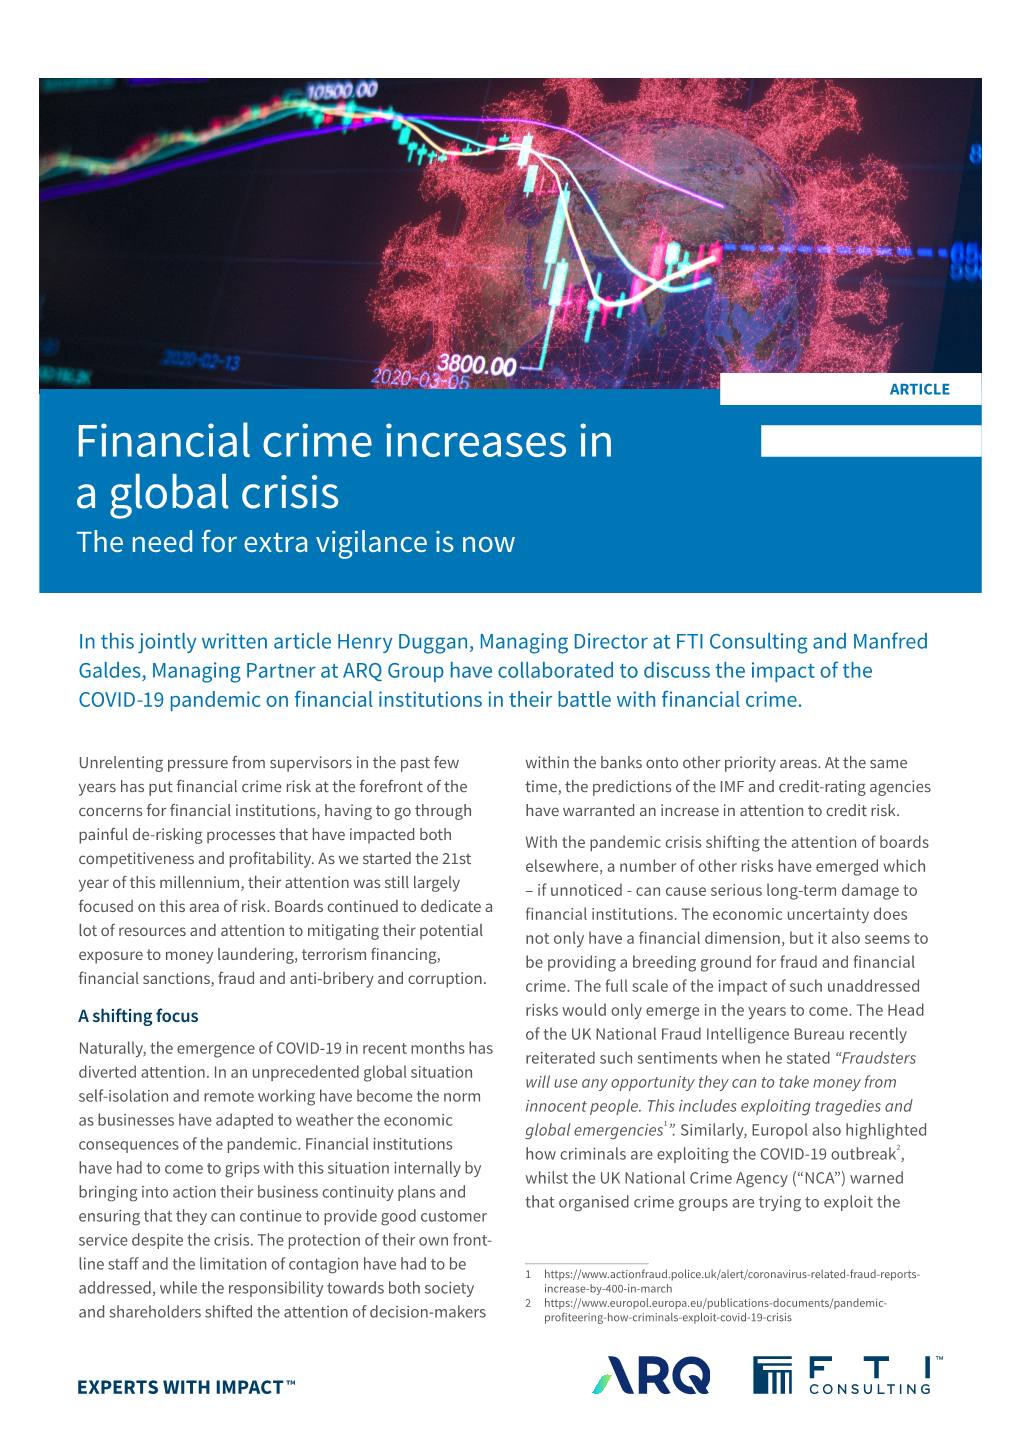 Financial Crime Increases in a Global Crisis the Need for Extra Vigilance Is Now